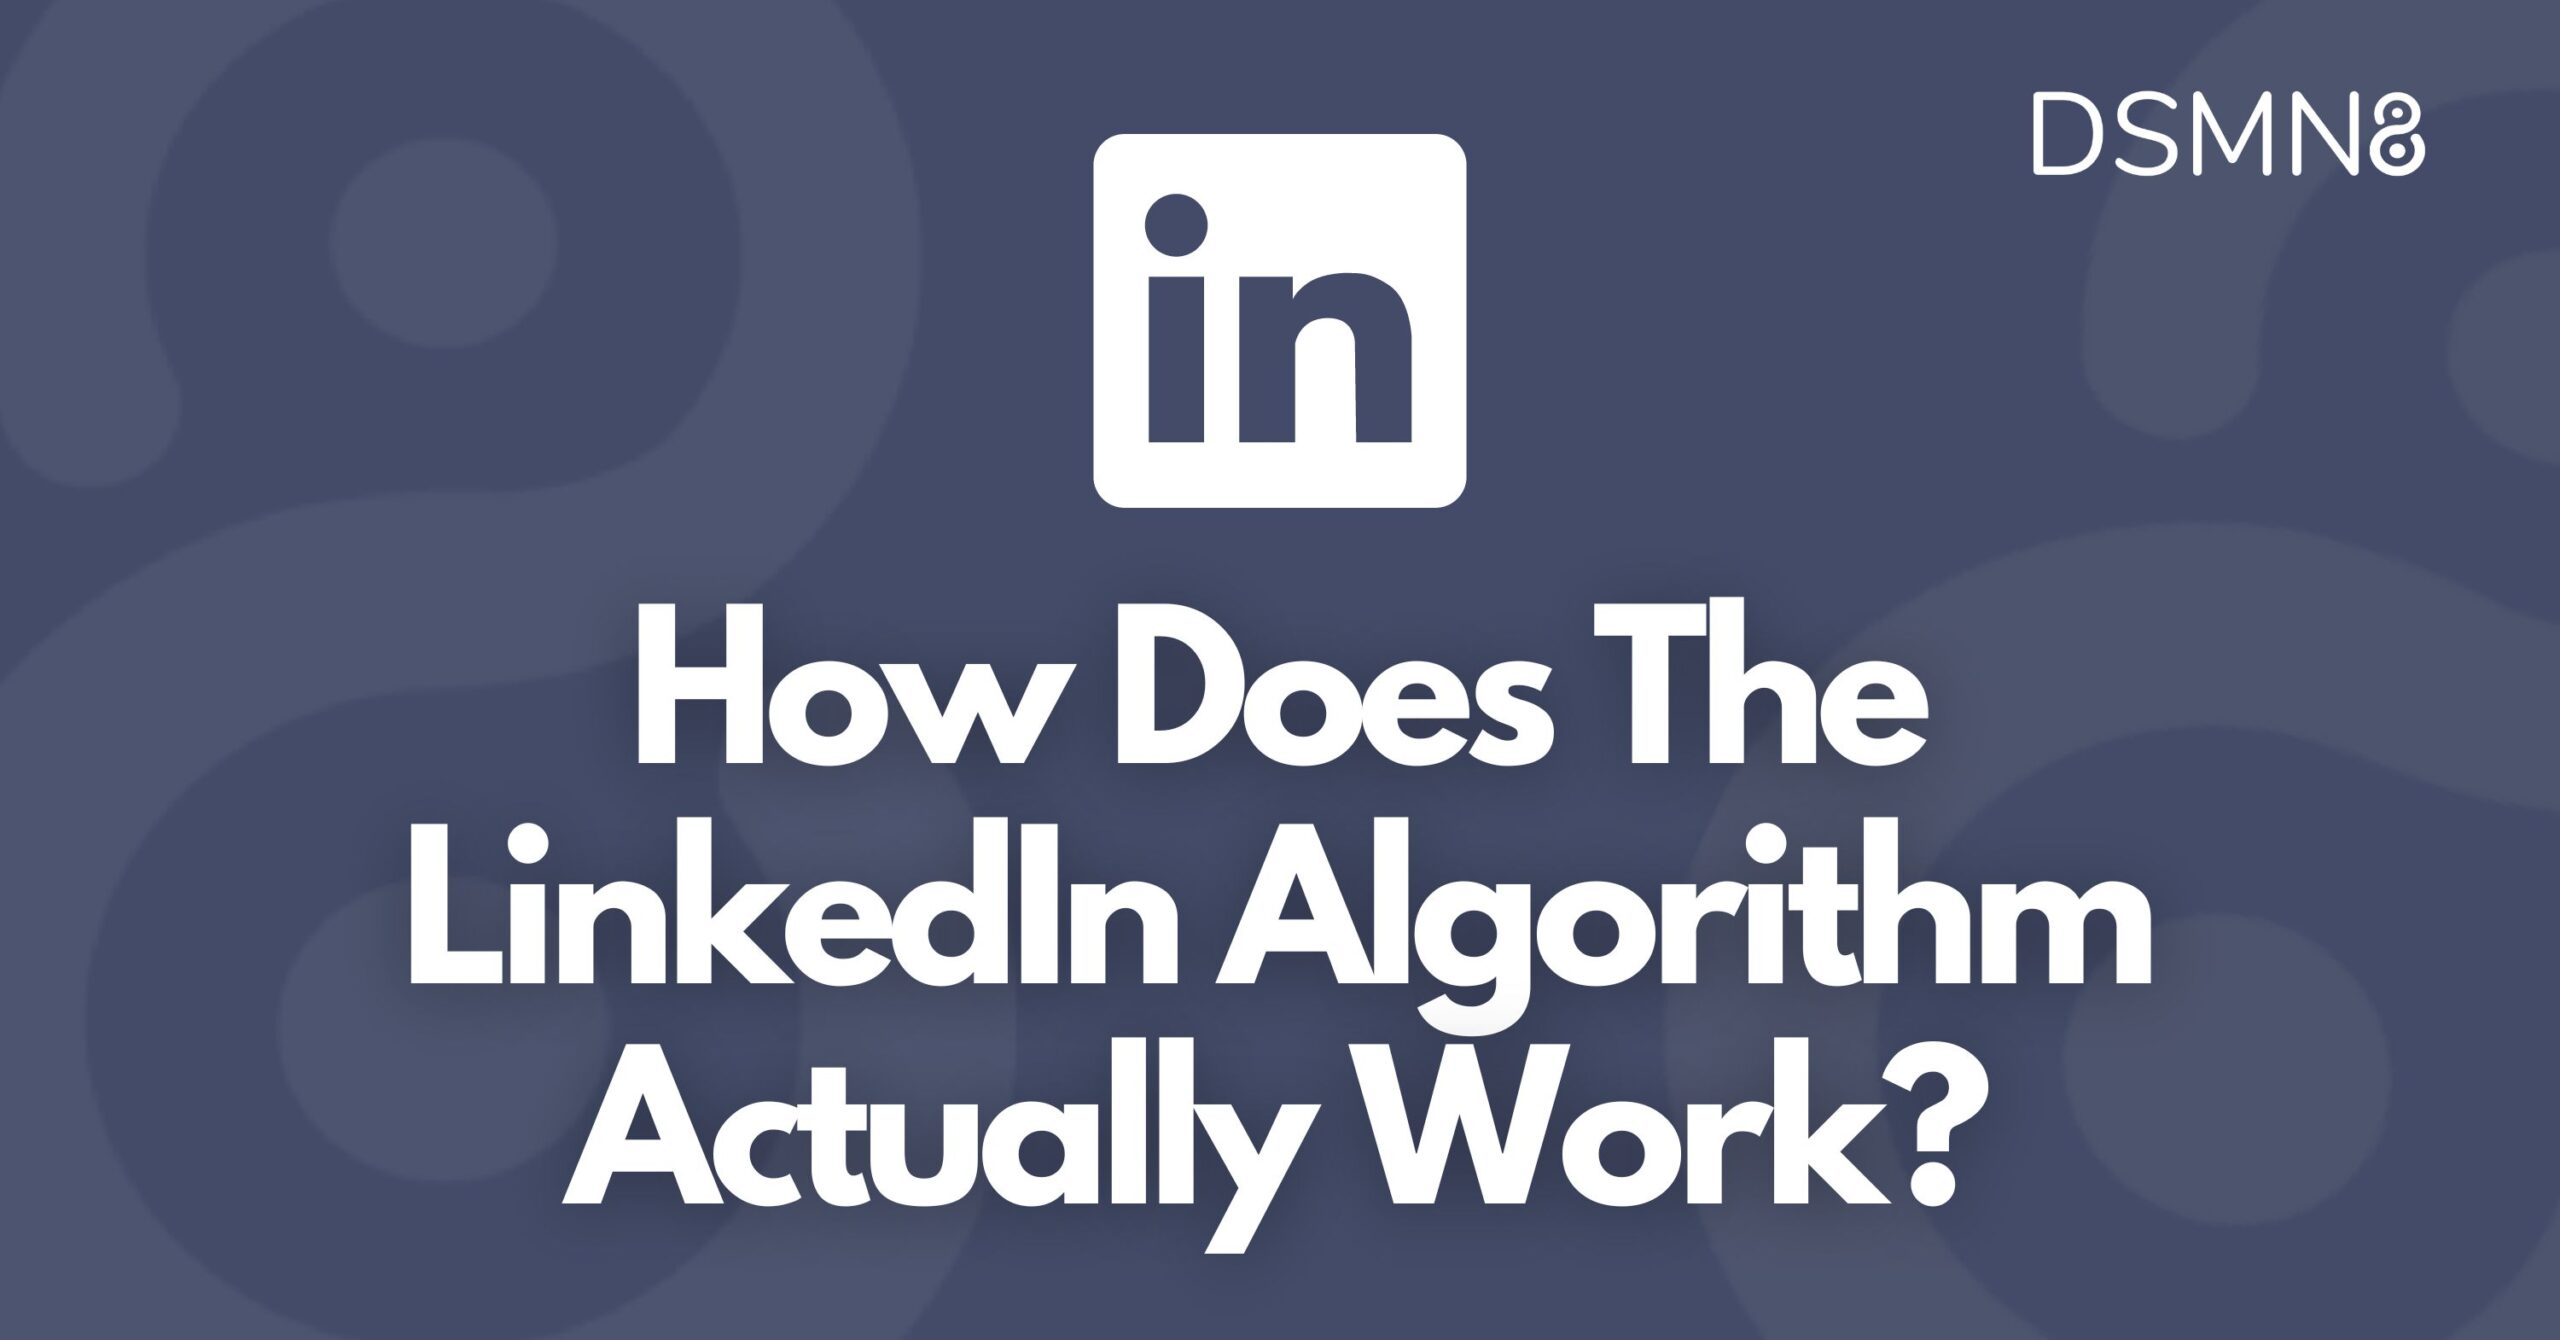 how does the LinkedIn algorithm actually work?